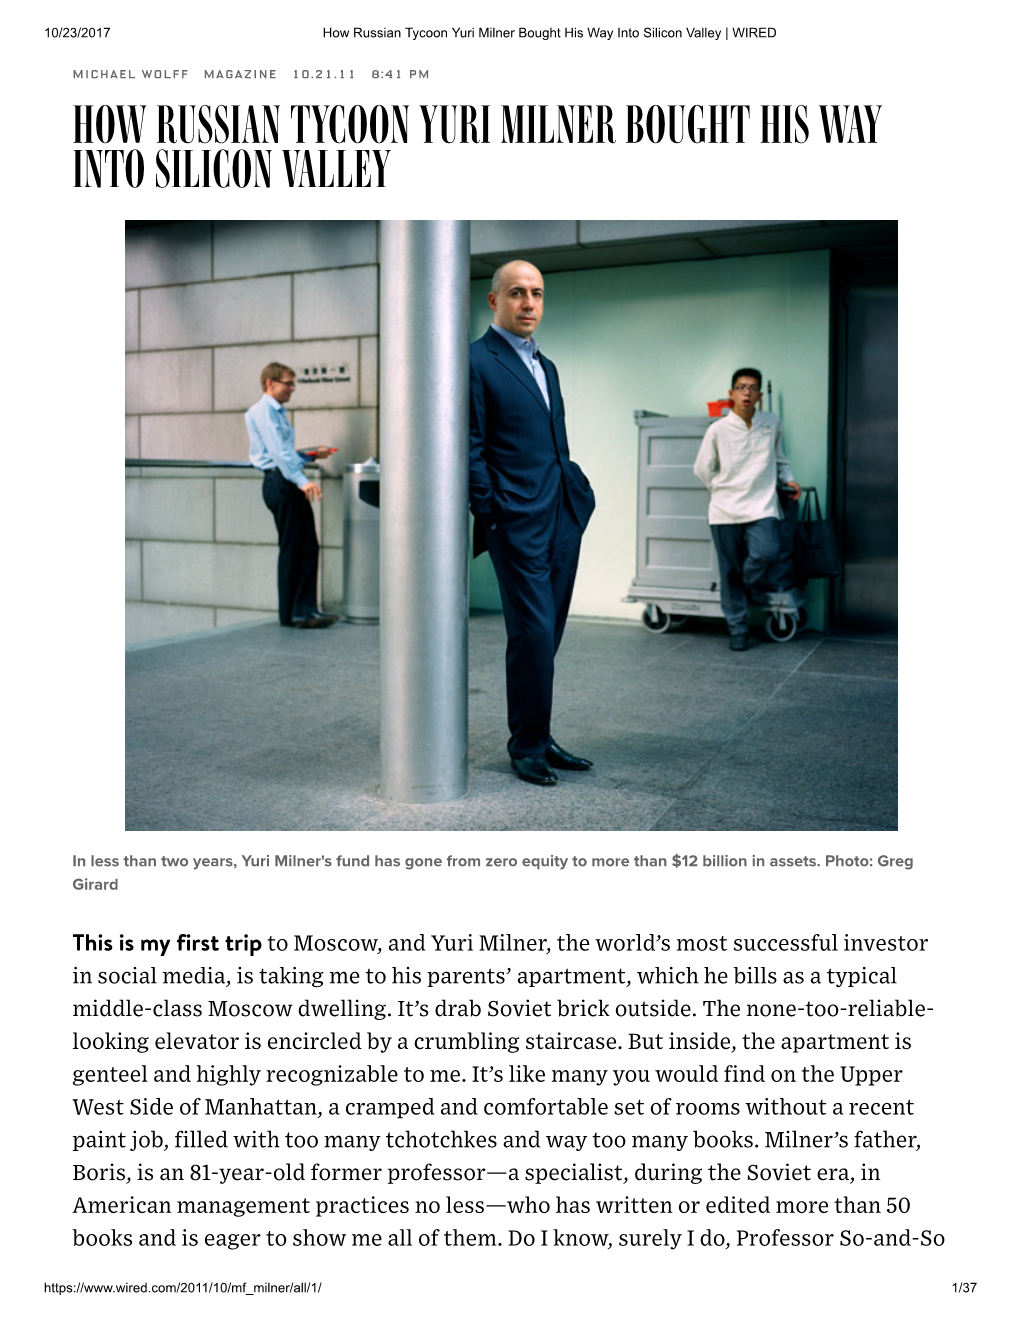 How Russian Tycoon Yuri Milner Bought His Way Into Silicon Valley | WIRED